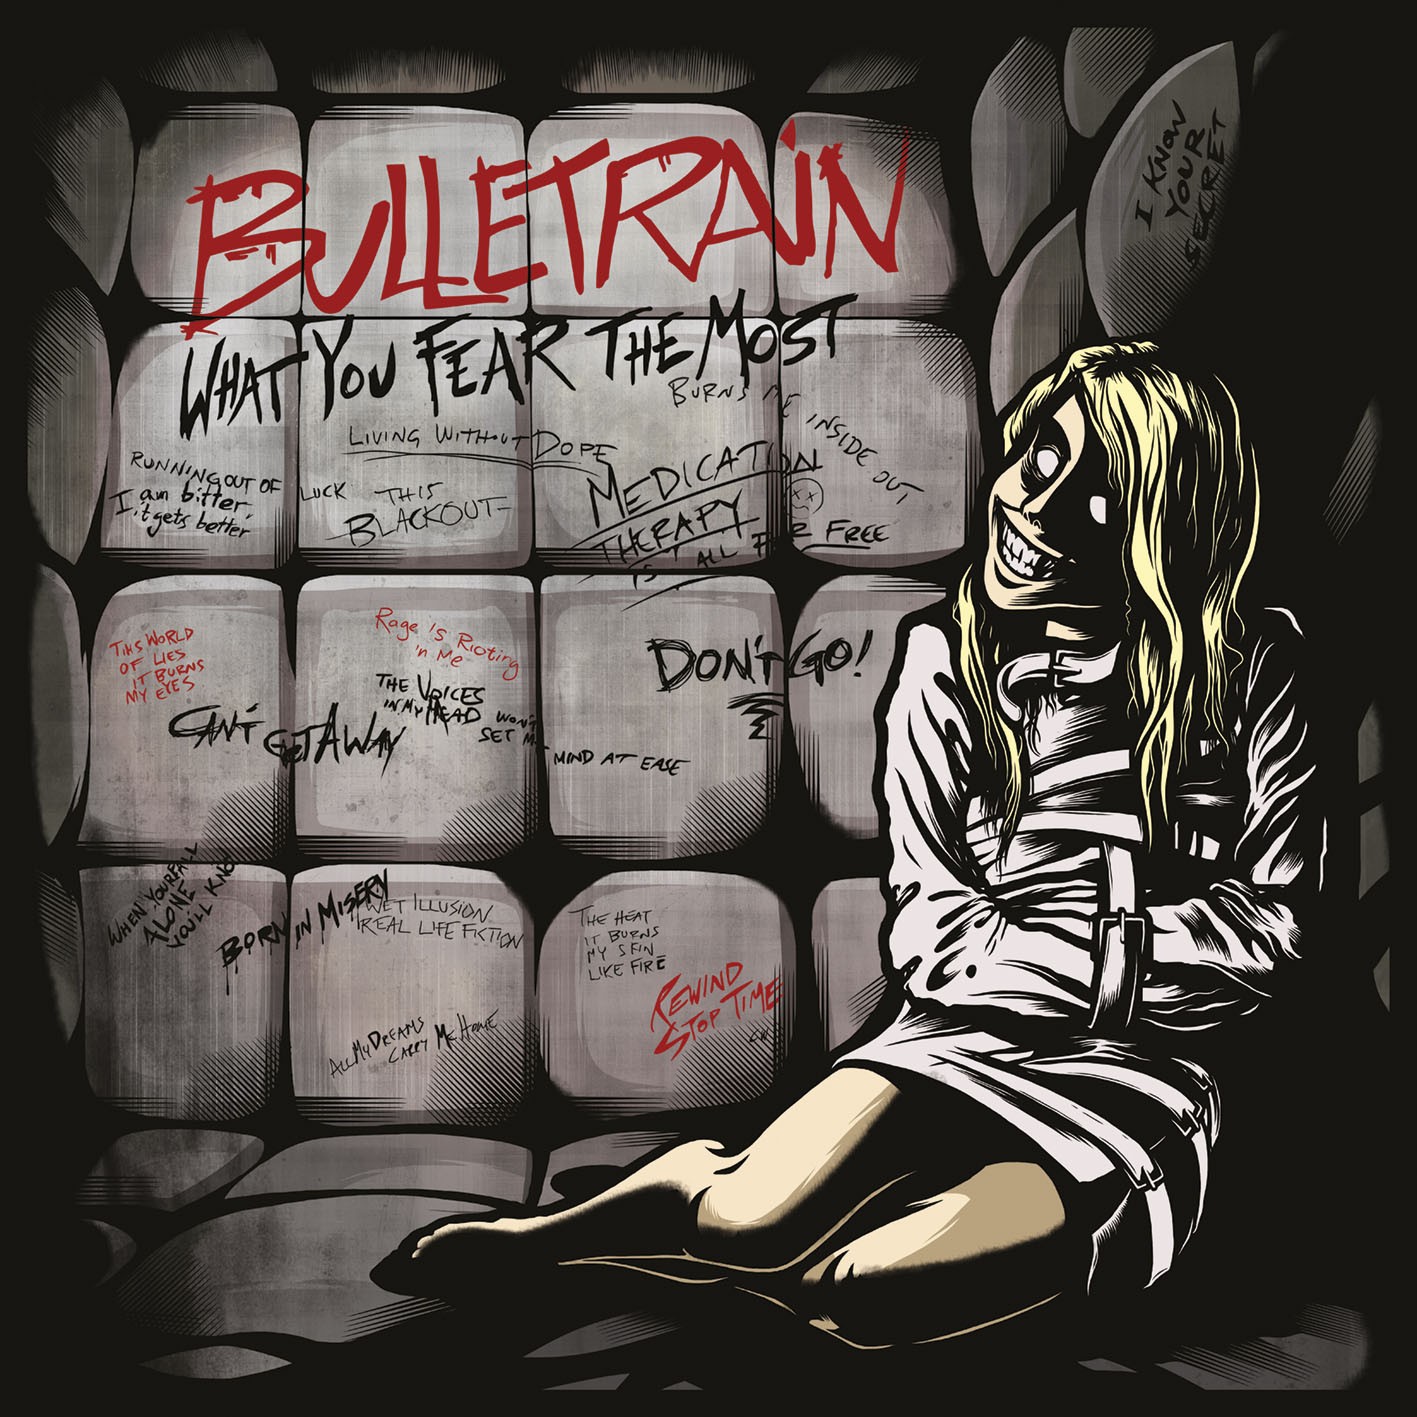 Bulletrain – What You Fear The Most